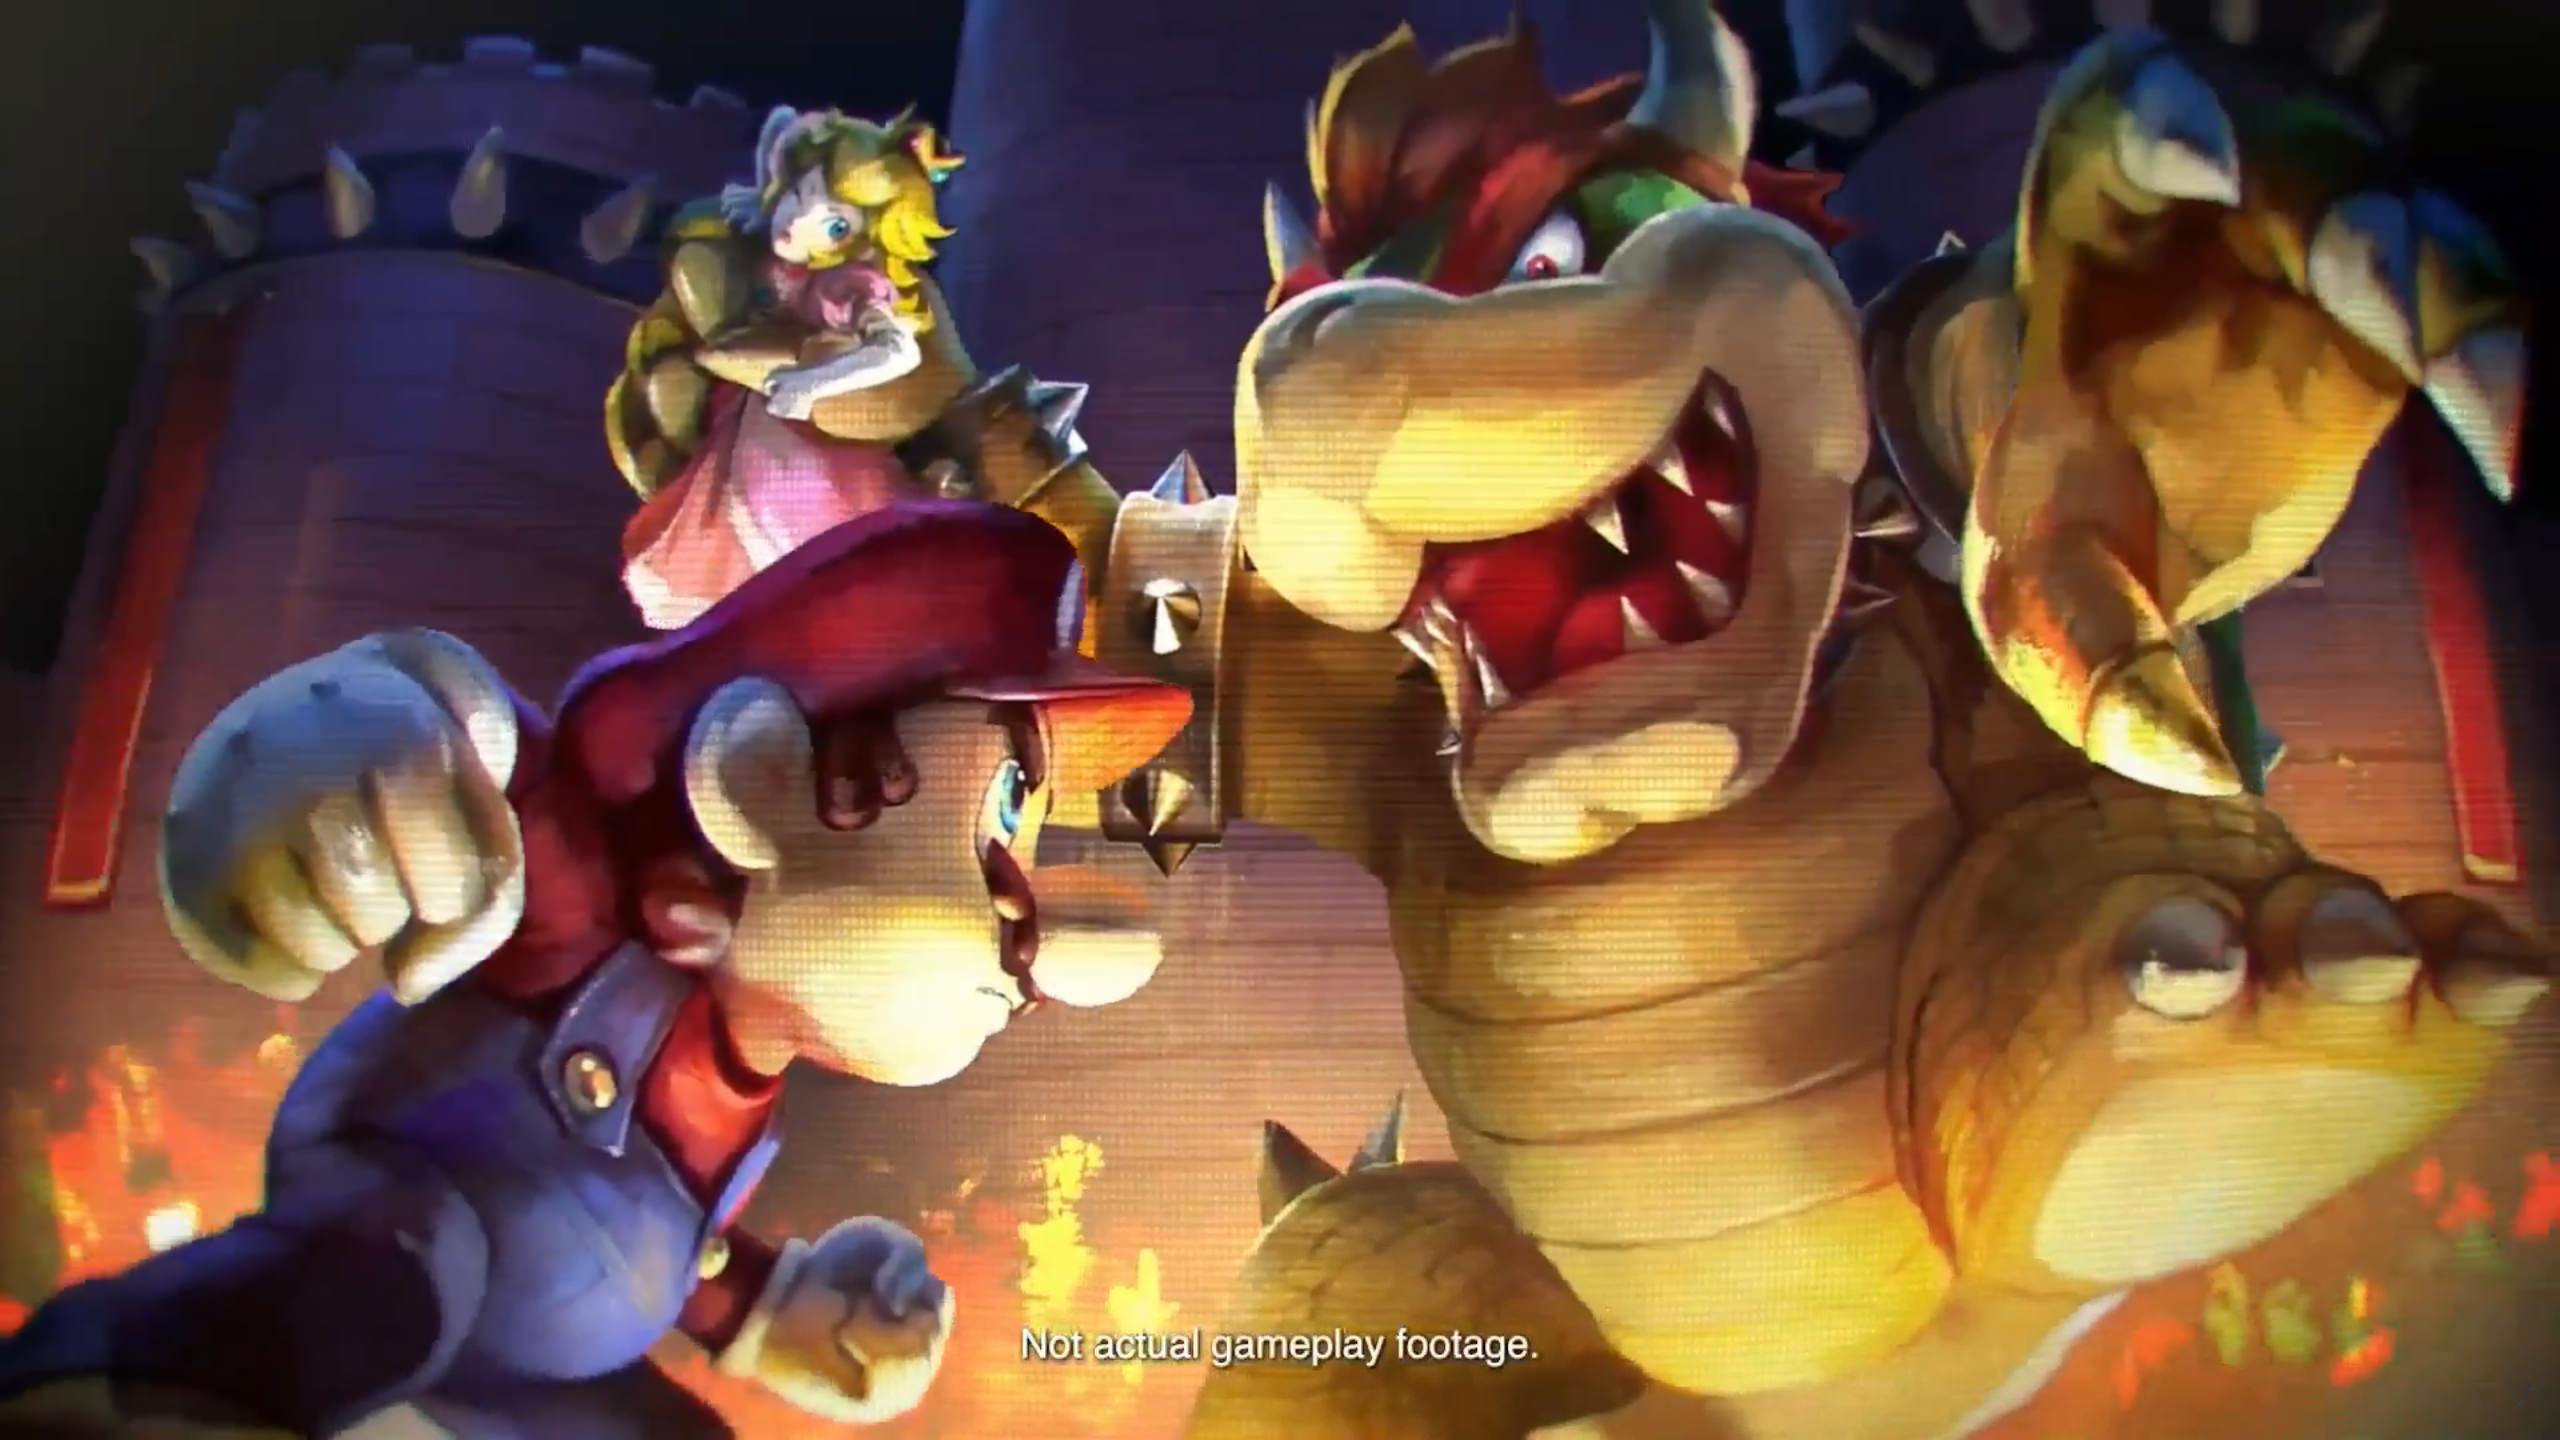 The super awesome villain art from the King K. Rool reveal trailer